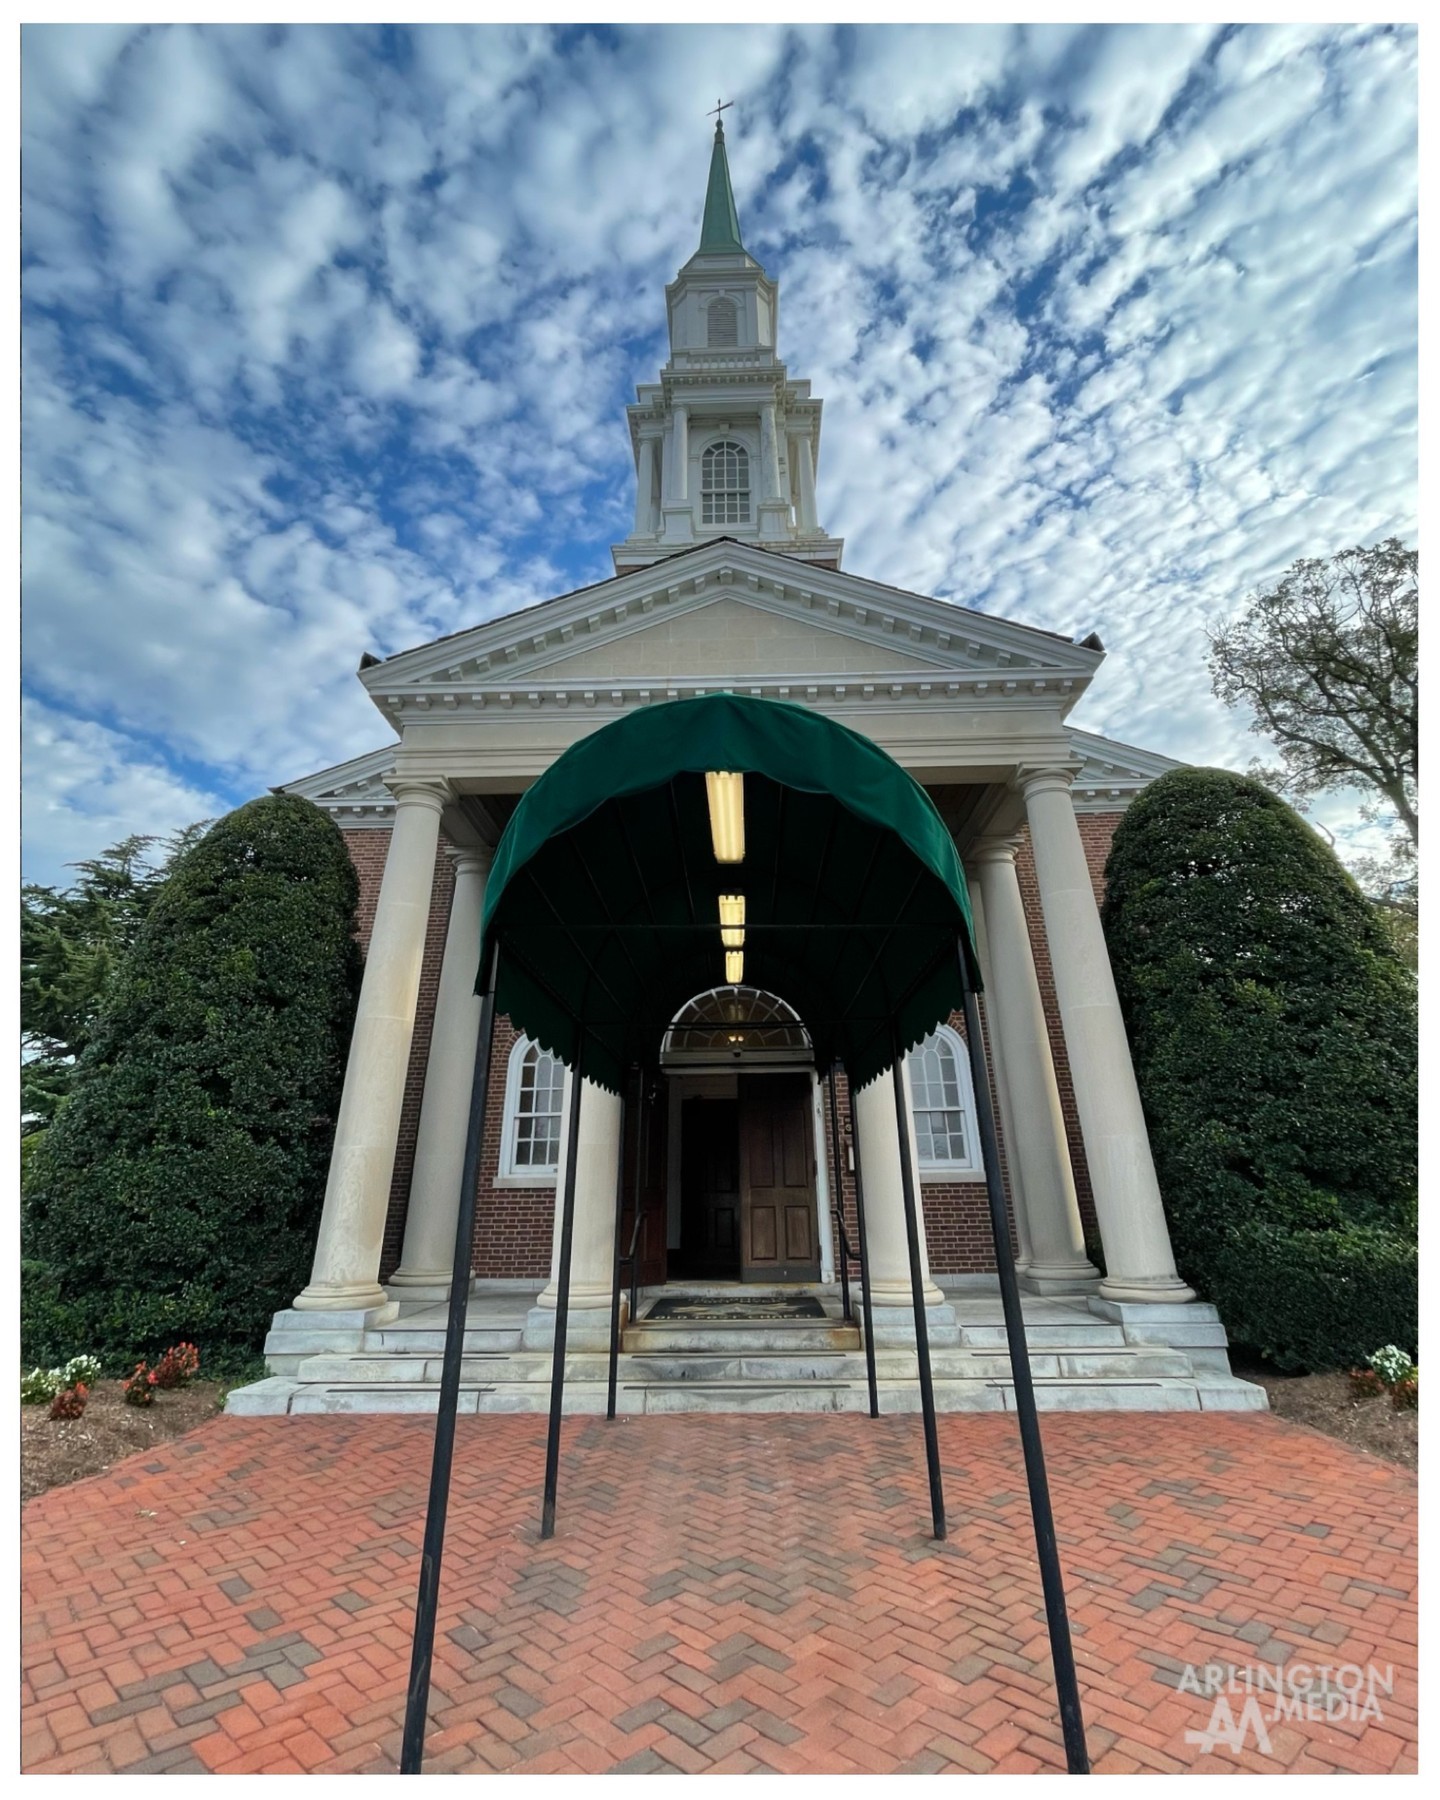 The Old Post Chapel adjoins Arlington National Cemetery and is the first place that many families are welcomed when they arrive for chapel services at Arlington National Cemetery.

PC: @arlingtonmedia